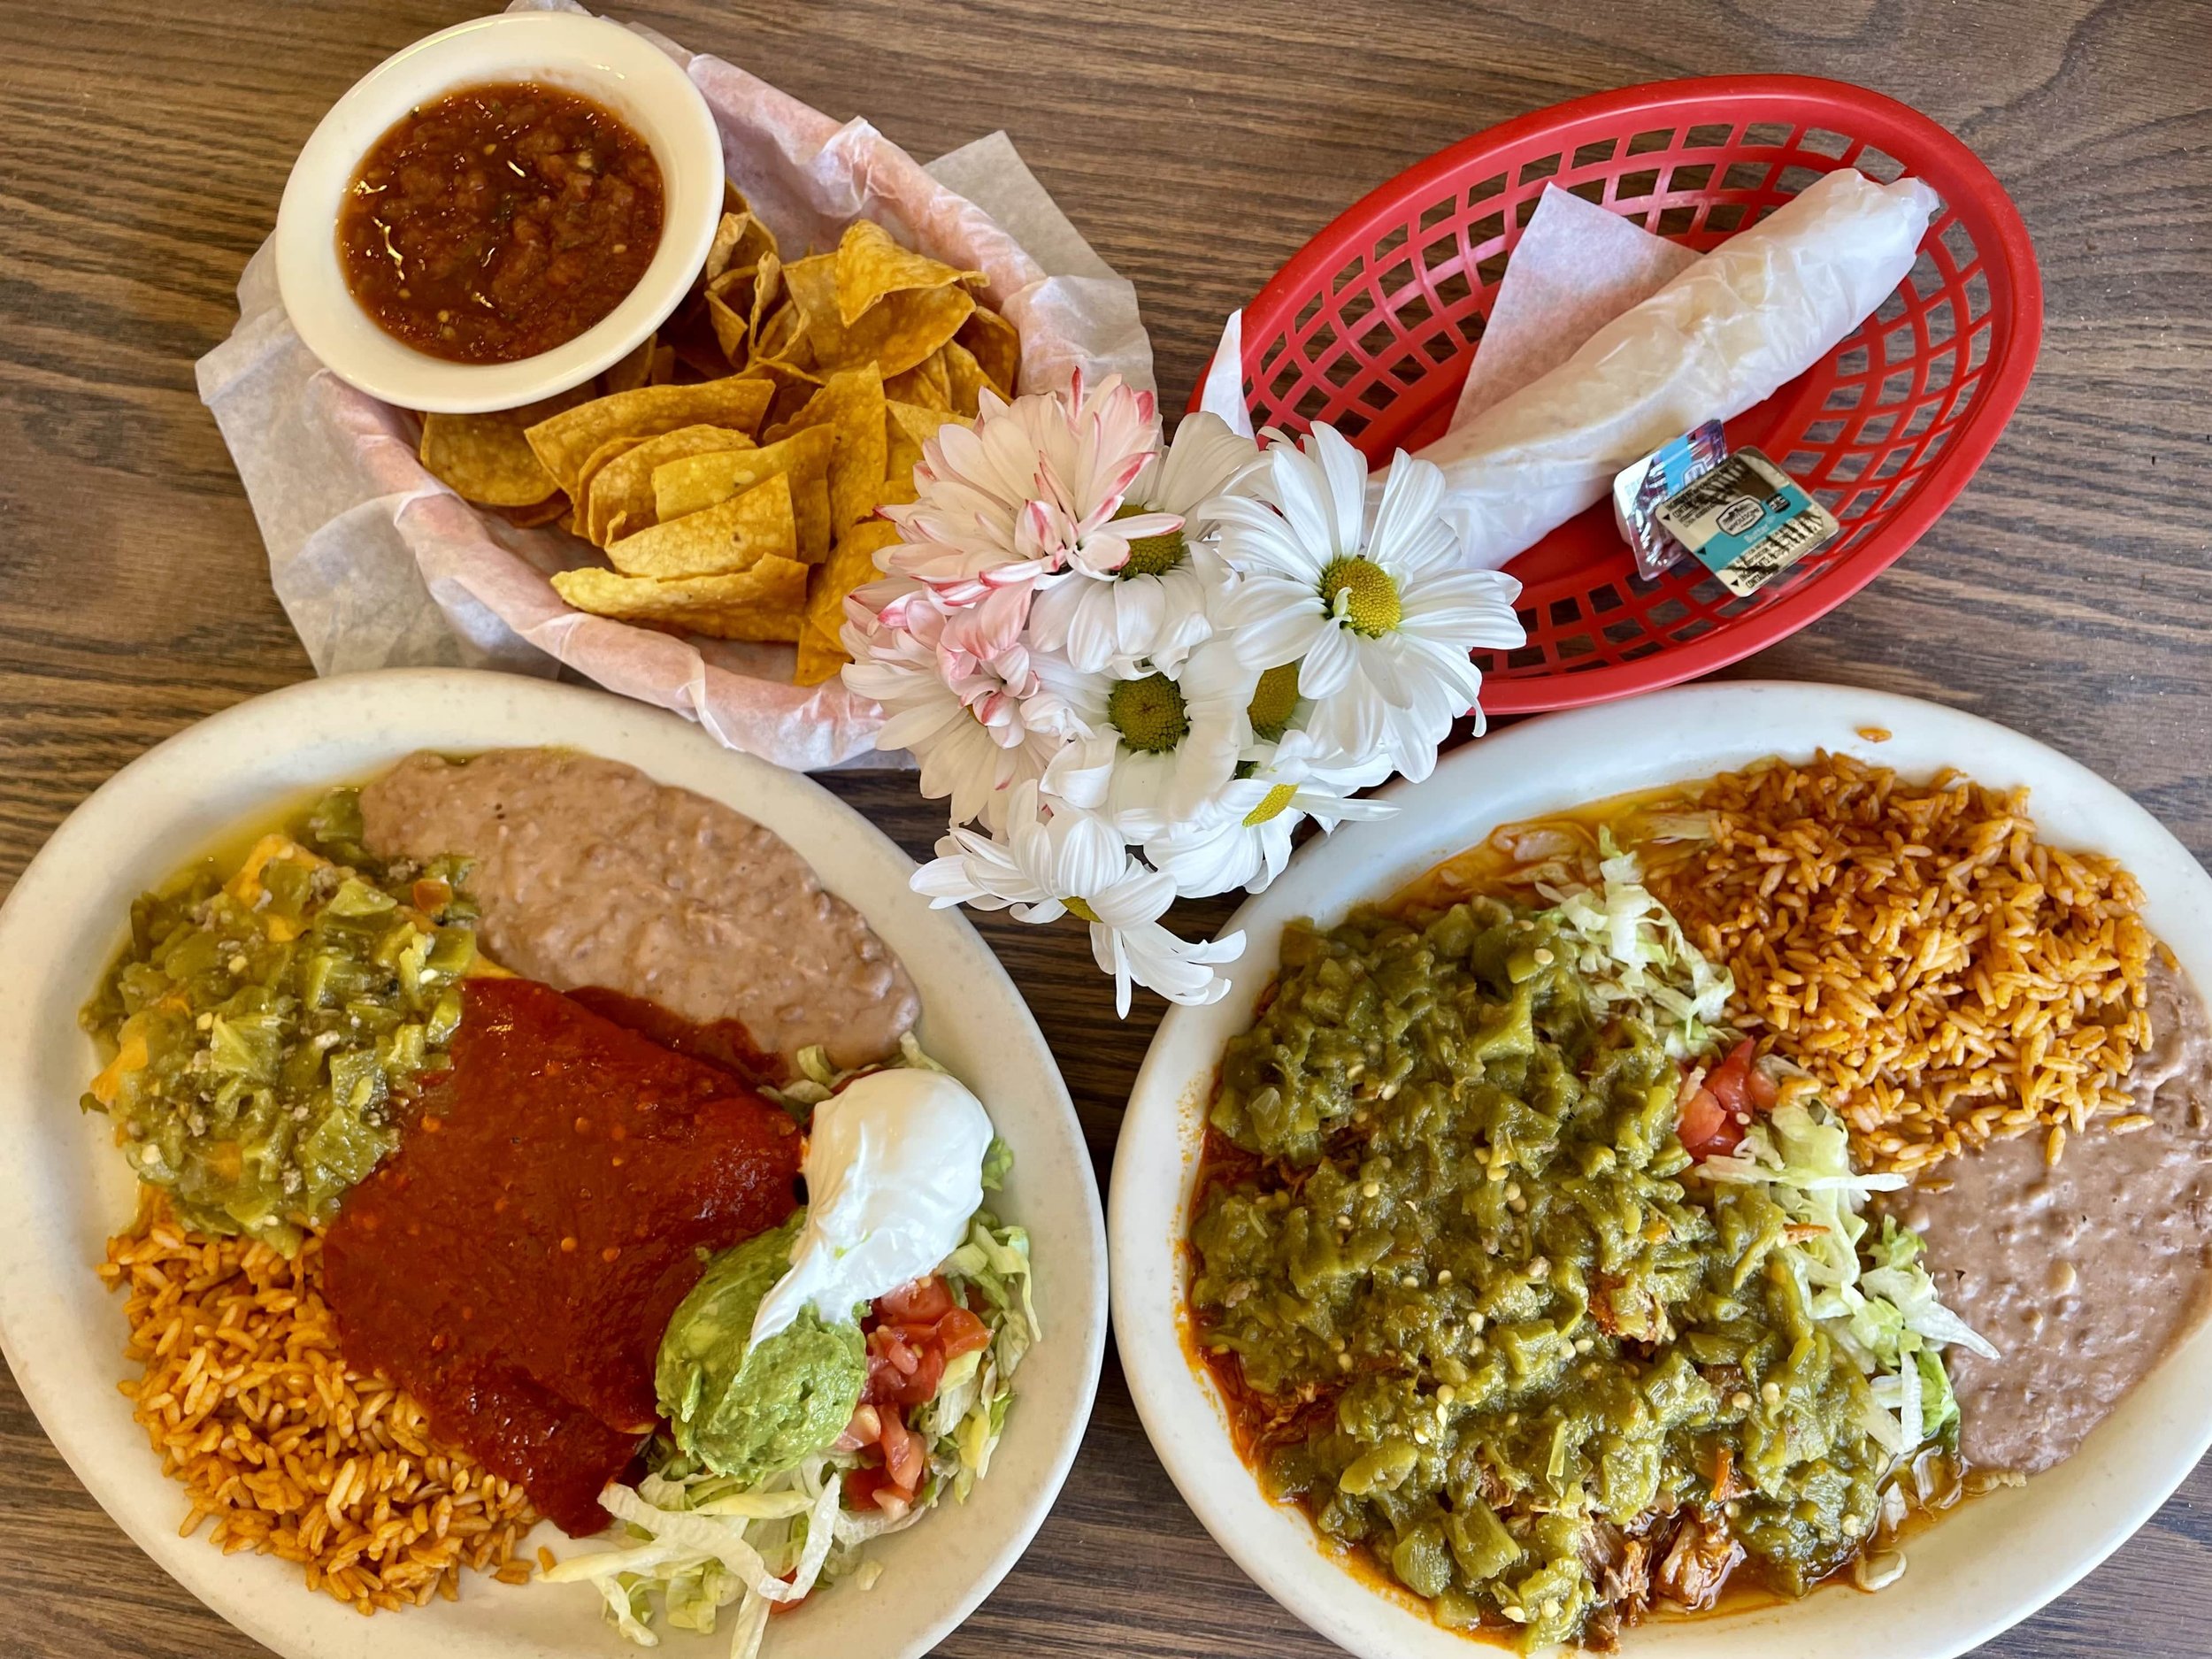 Two Carne Adovada dishes at Mary & Tito's restaurant in New Mexico.